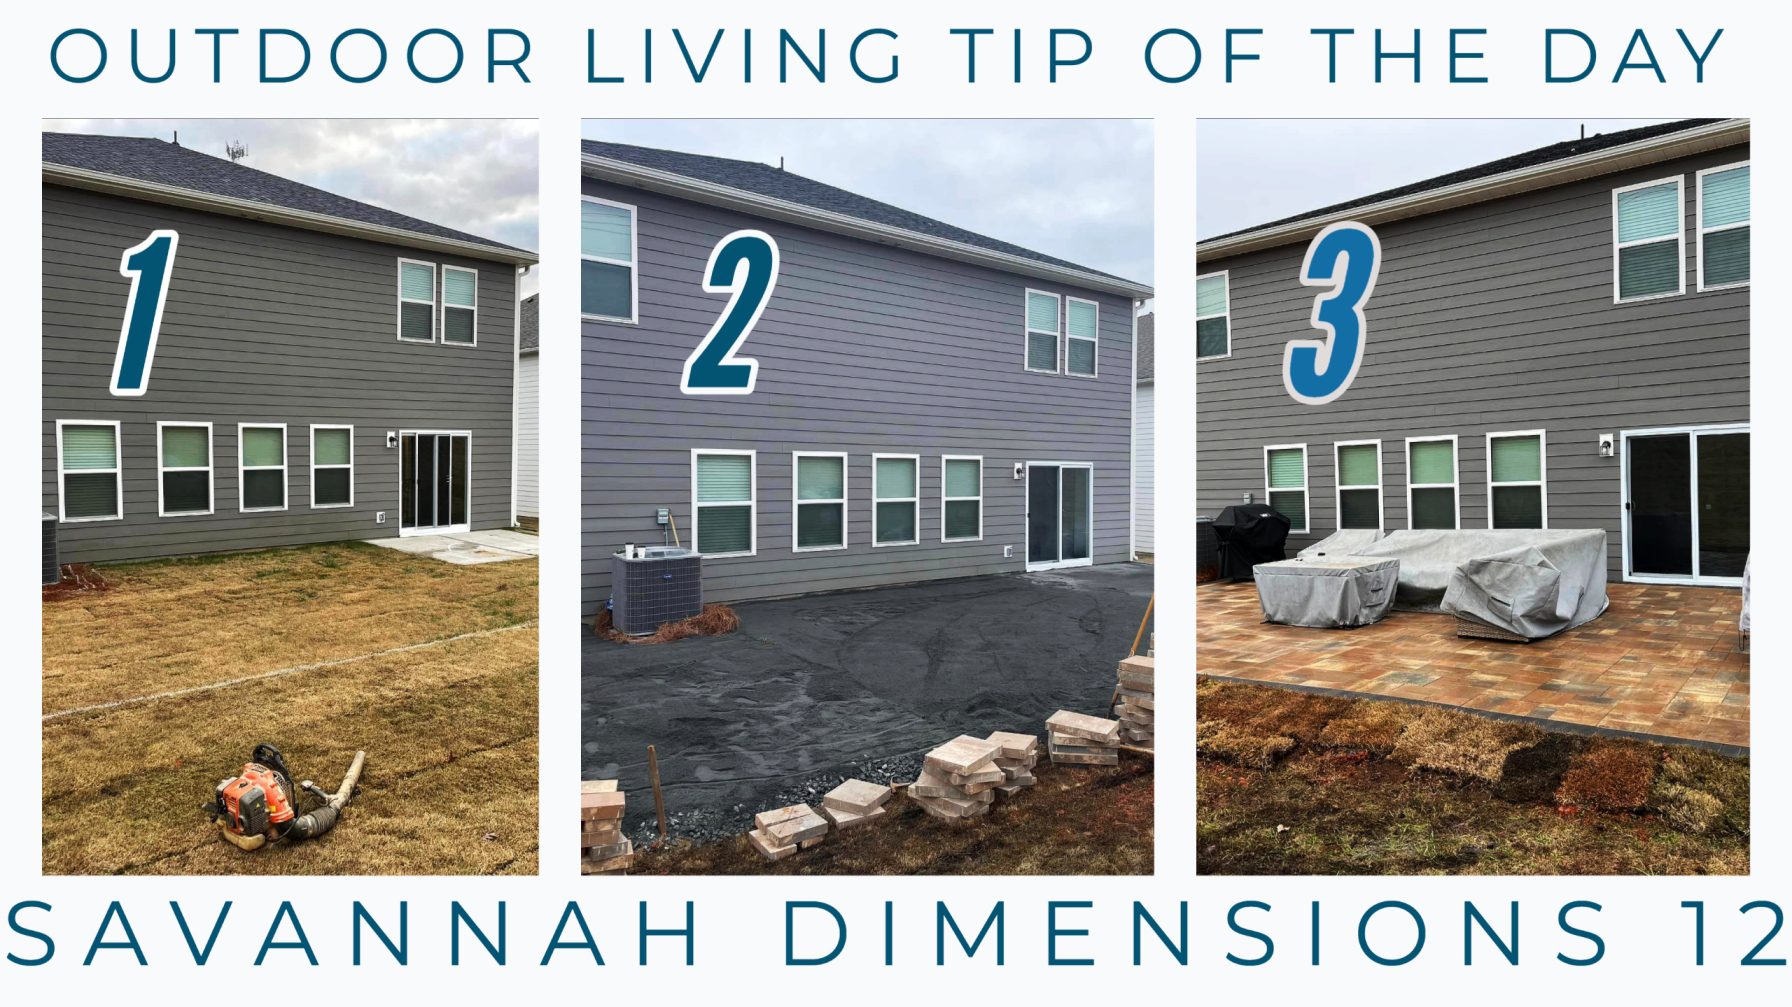 Belgard Savannah Dimensions 12 Pavers – Outdoor Living Tip of the Day